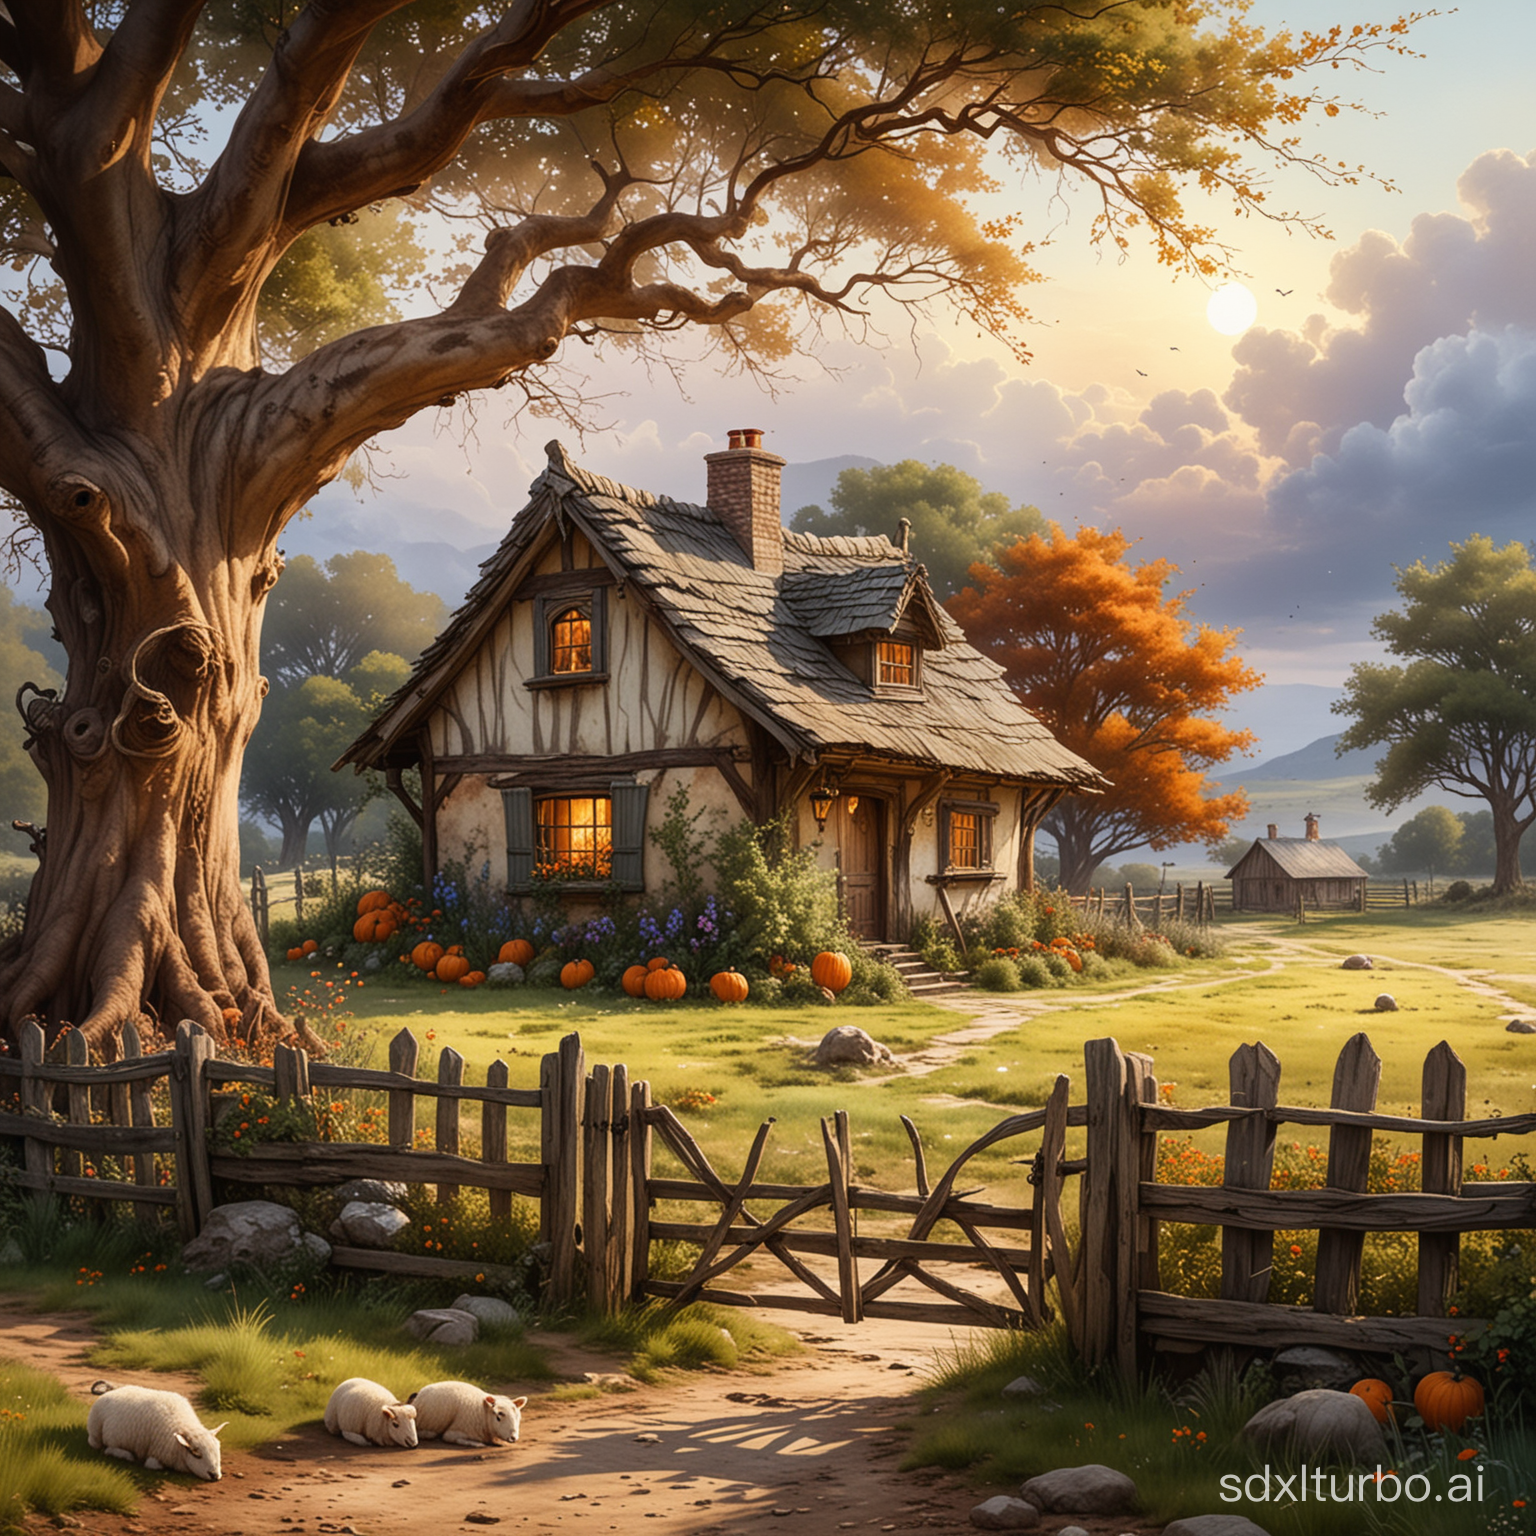 a hyper-realistic 3D HD watercolor alcohol ink depiction of a charming old cottage nestled under the sprawling branches of an ancient tree in a tranquil fantasy setting. There should be a weathered wooden gate in the foreground, a rustic fence, an overcast sky indicating early morning or approaching dusk, a pumpkin on the ground, and sheep grazing, all adding to the pastoral mood. The artwork should convey the feel of a bygone era, reminiscent of a fairy tale or a peaceful retreat in a fantasy novel.